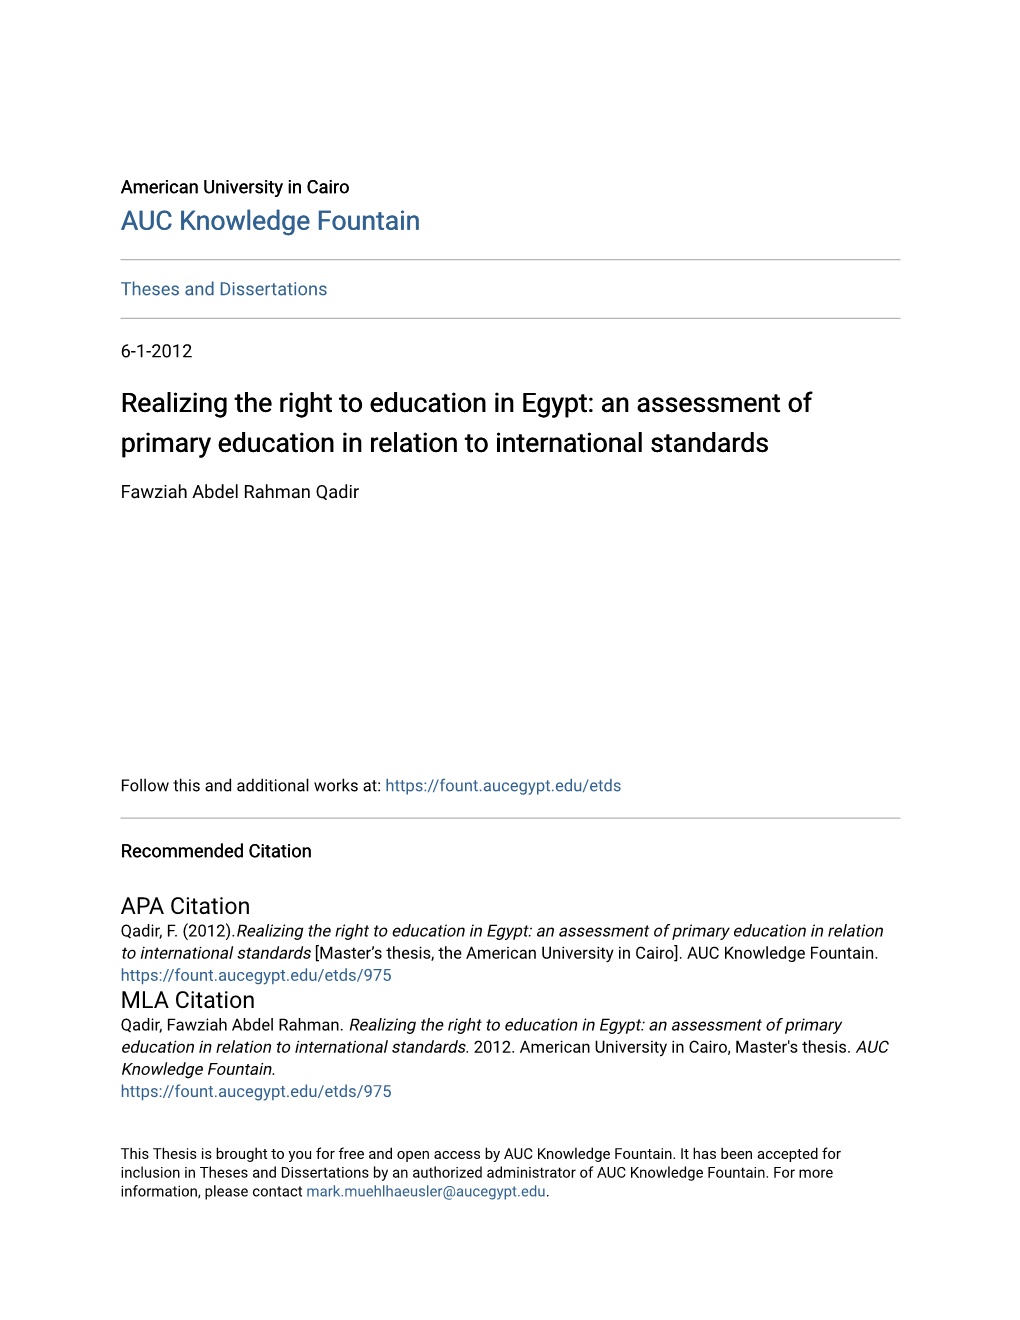 Realizing the Right to Education in Egypt: an Assessment of Primary Education in Relation to International Standards